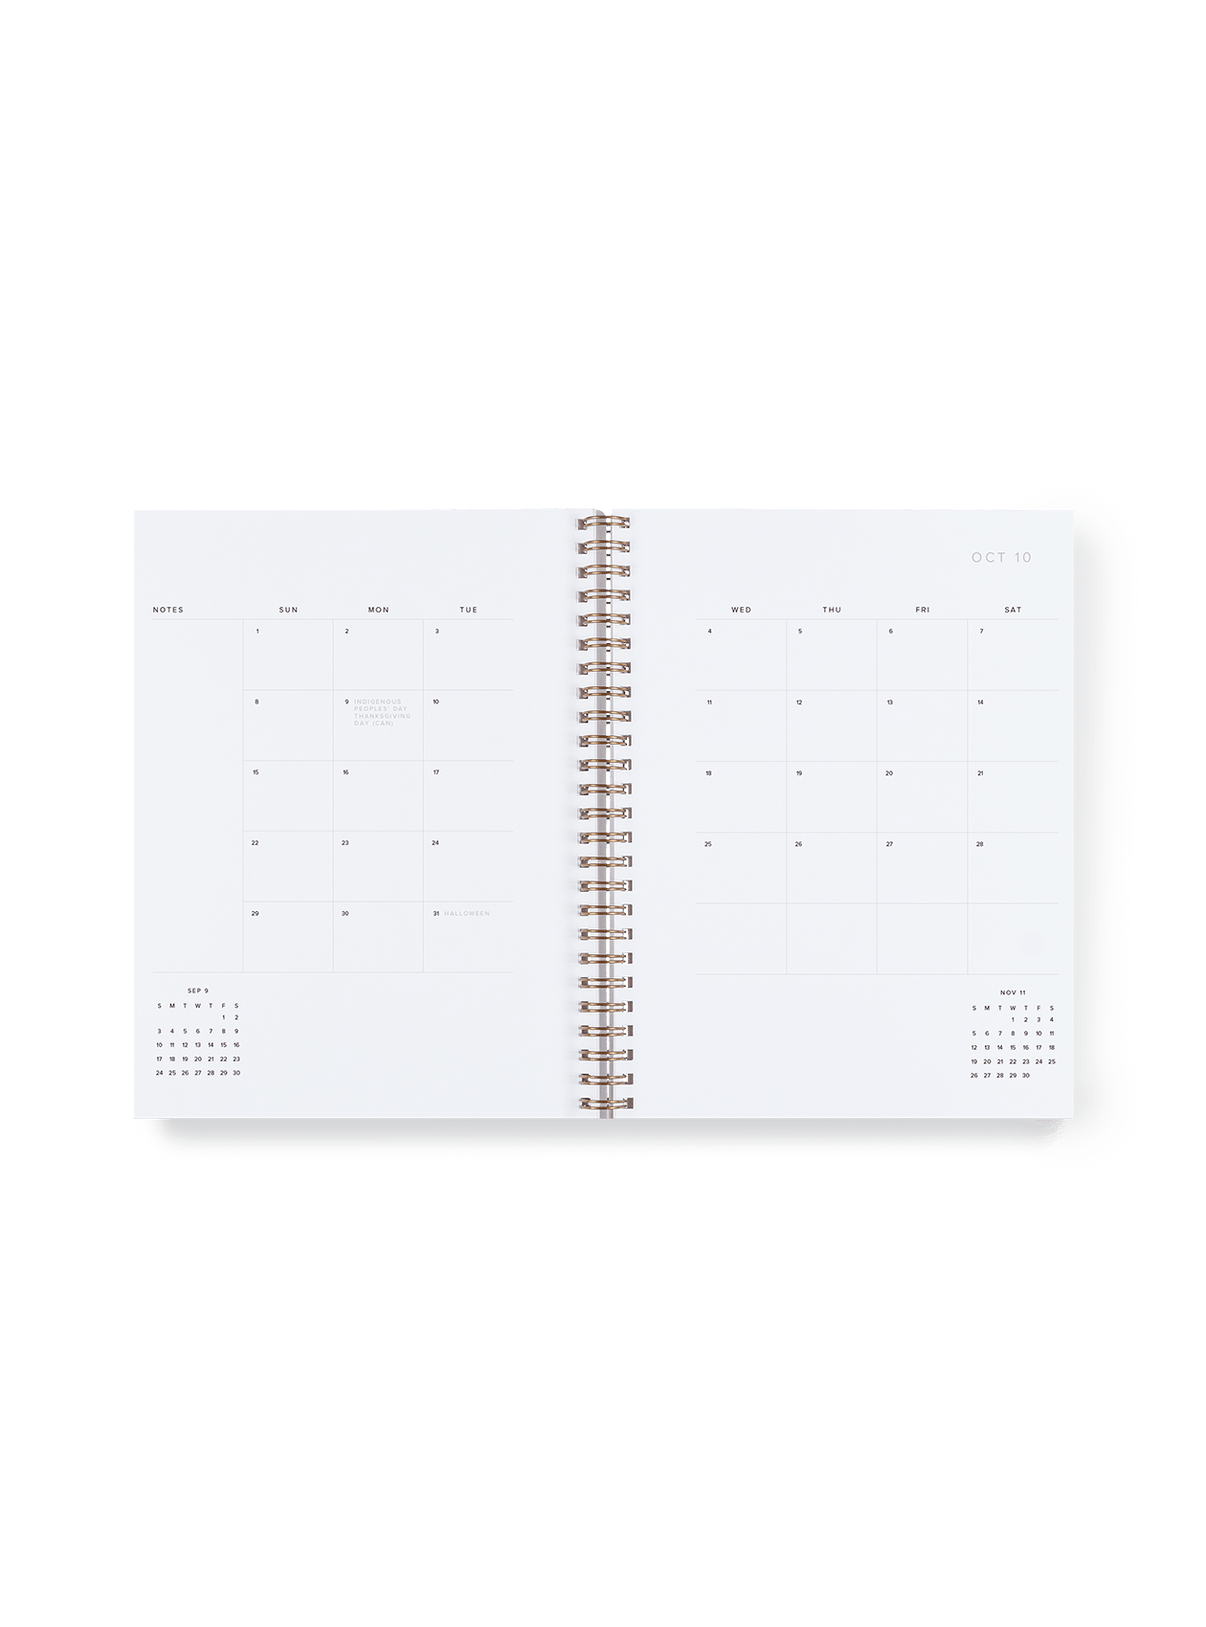 Weekly Grid planner interior monthly view